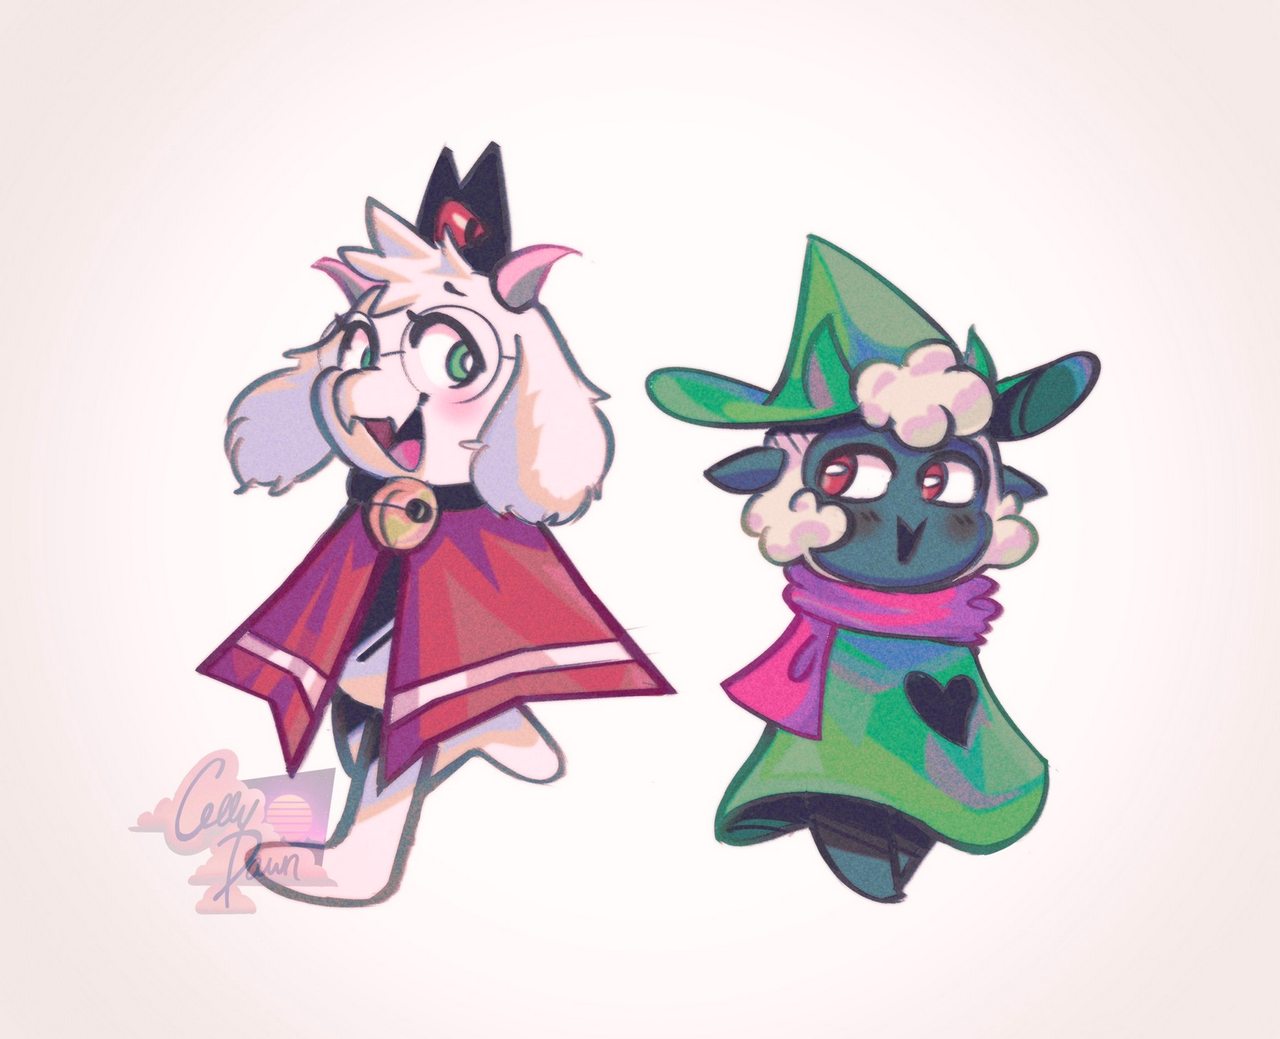 Lamb Cult Of The Lamb Ralsei Red Crown Cult Of The Lamb By Cellydaw